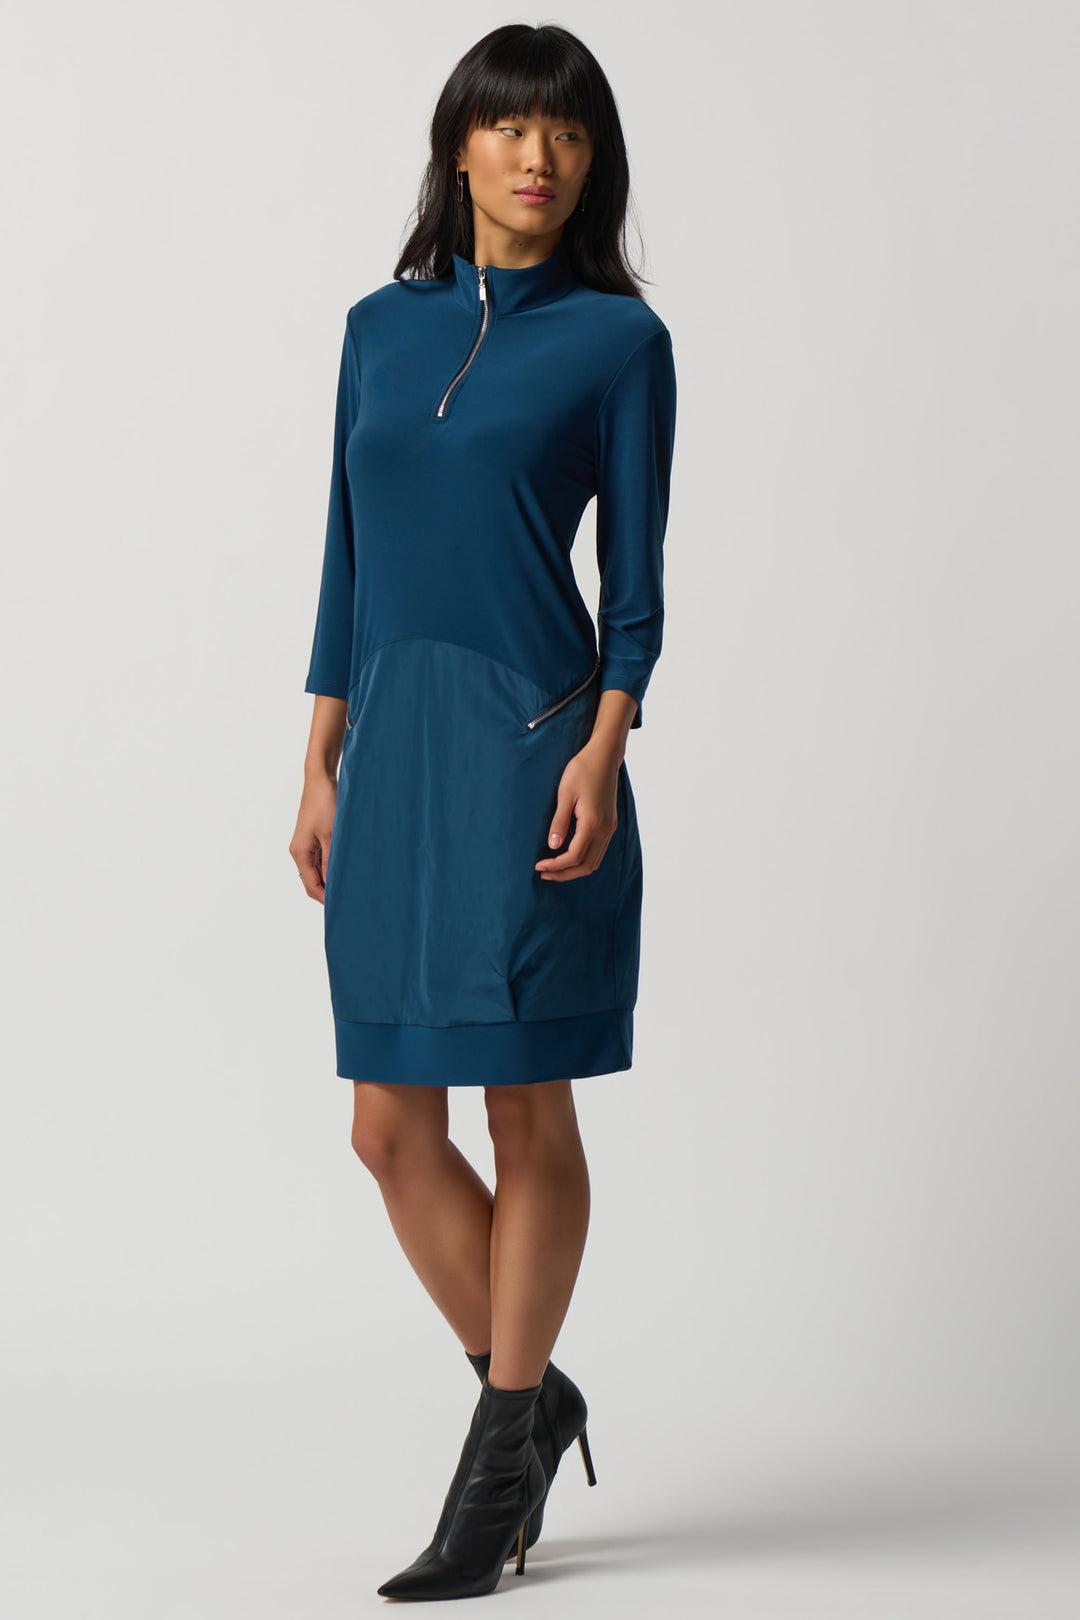 Its figure-hugging fit is designed to flatter any shape, while the zip details at the waist and collar add a tasteful touch of style. 